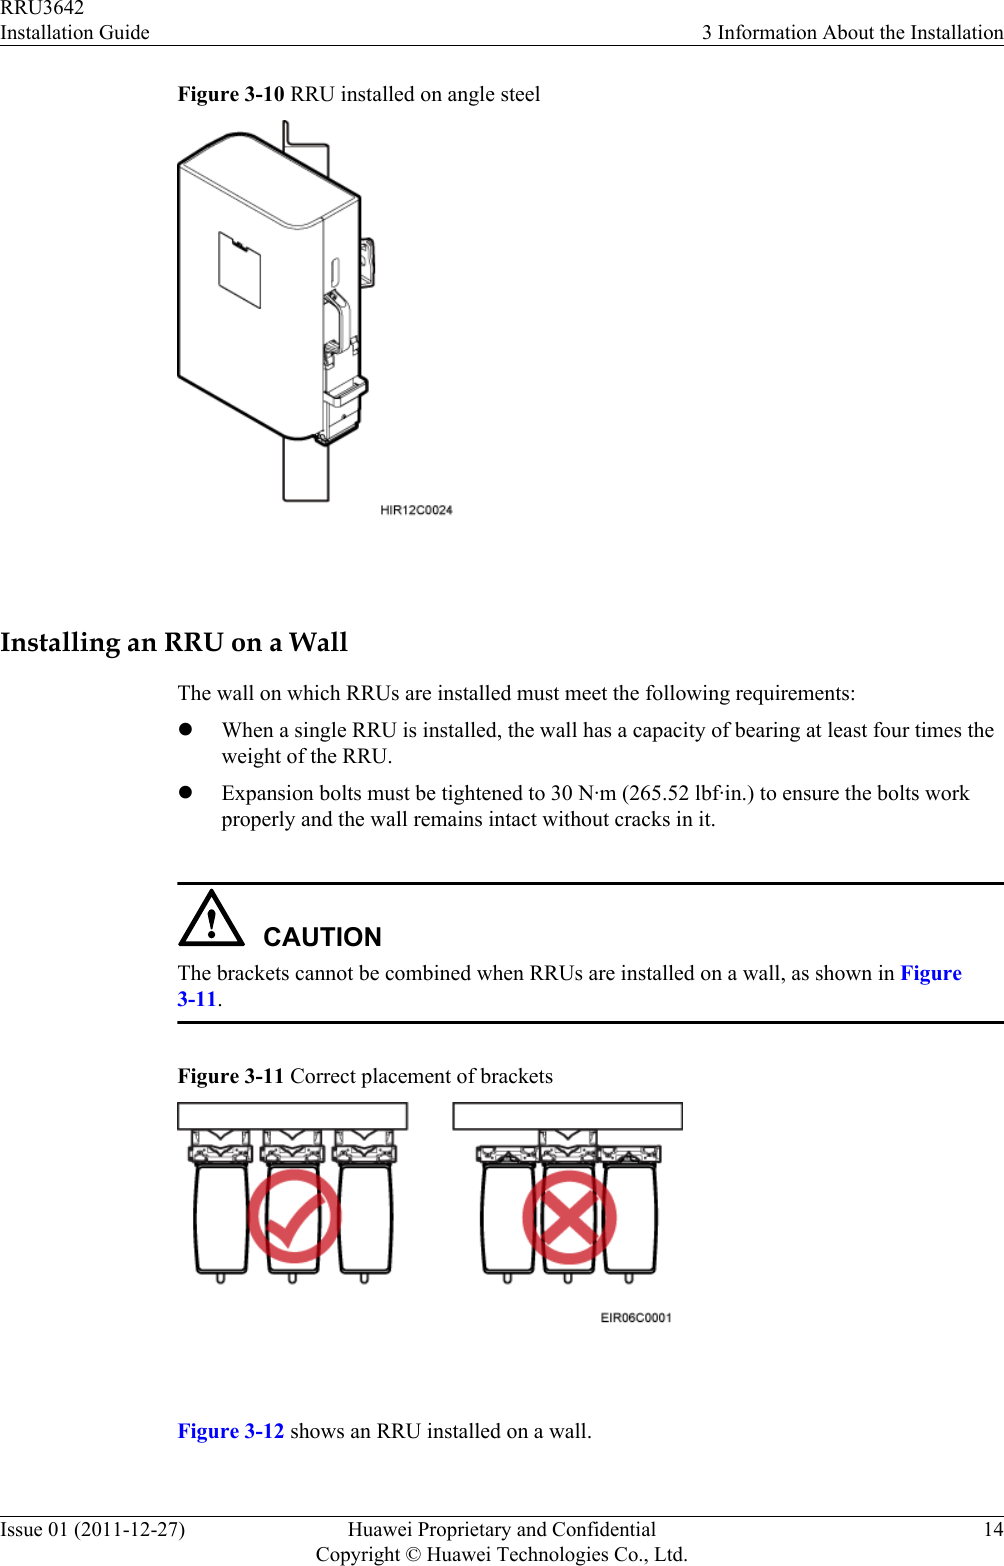 Figure 3-10 RRU installed on angle steel Installing an RRU on a WallThe wall on which RRUs are installed must meet the following requirements:lWhen a single RRU is installed, the wall has a capacity of bearing at least four times theweight of the RRU.lExpansion bolts must be tightened to 30 N·m (265.52 lbf·in.) to ensure the bolts workproperly and the wall remains intact without cracks in it.CAUTIONThe brackets cannot be combined when RRUs are installed on a wall, as shown in Figure3-11.Figure 3-11 Correct placement of brackets Figure 3-12 shows an RRU installed on a wall.RRU3642Installation Guide 3 Information About the InstallationIssue 01 (2011-12-27) Huawei Proprietary and ConfidentialCopyright © Huawei Technologies Co., Ltd.14